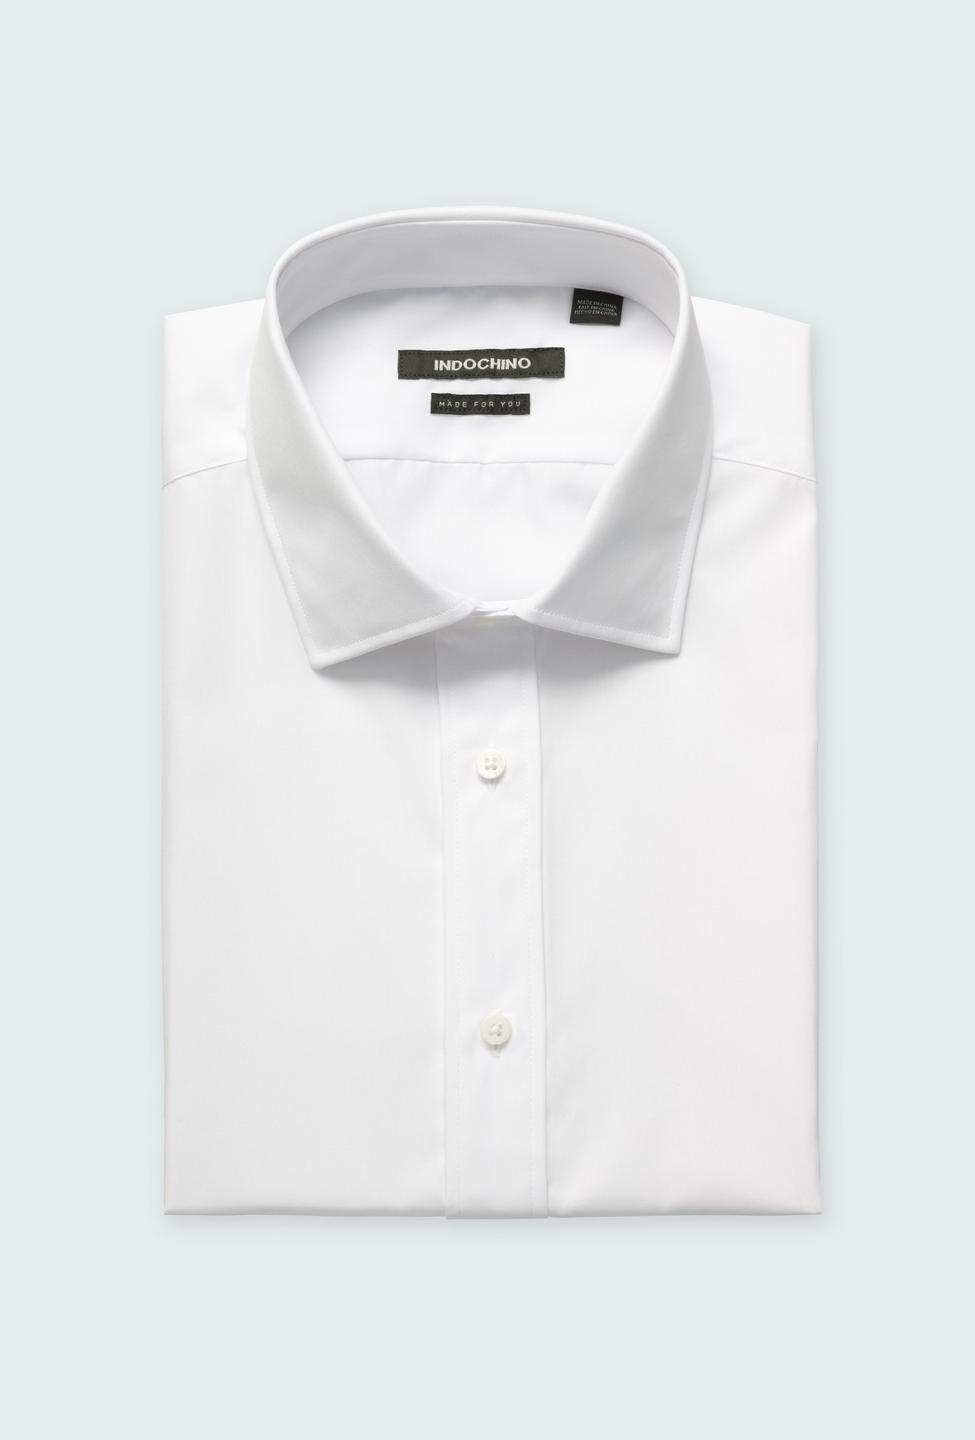 White shirt - Helston Solid Design from Premium Indochino Collection